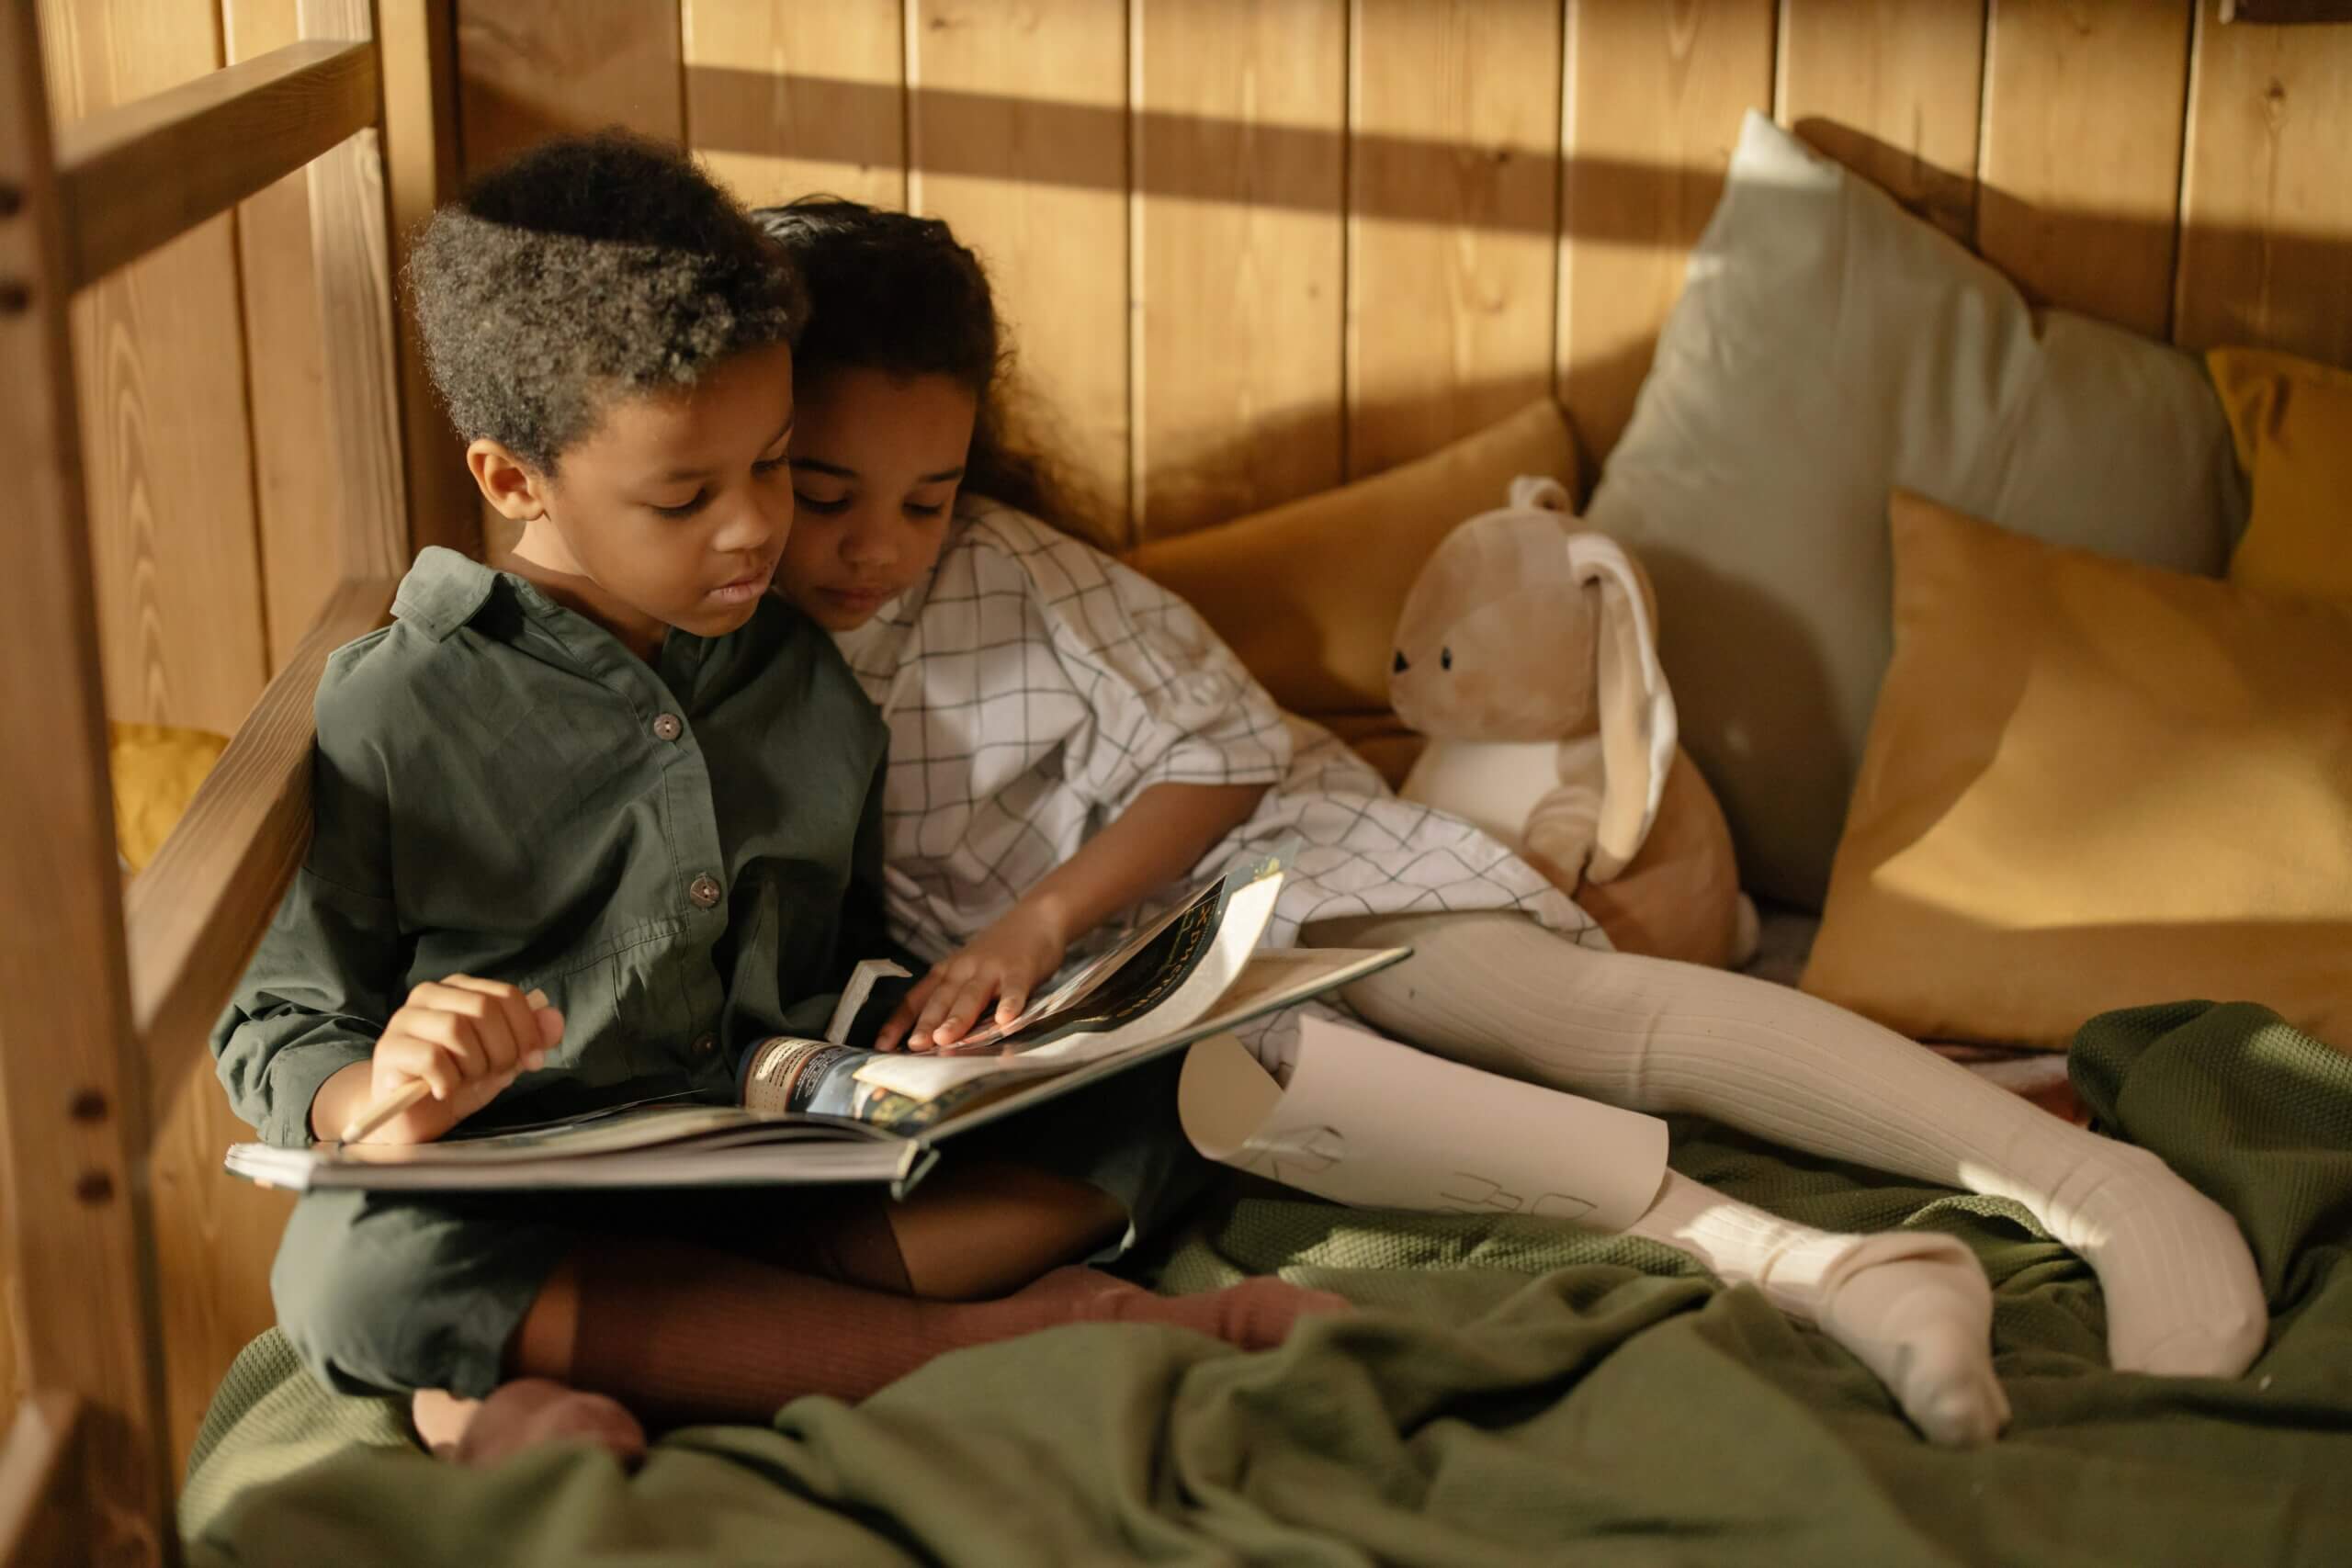 A boy and a girl reading a book on a bed next to a stuffed toy rabbit.